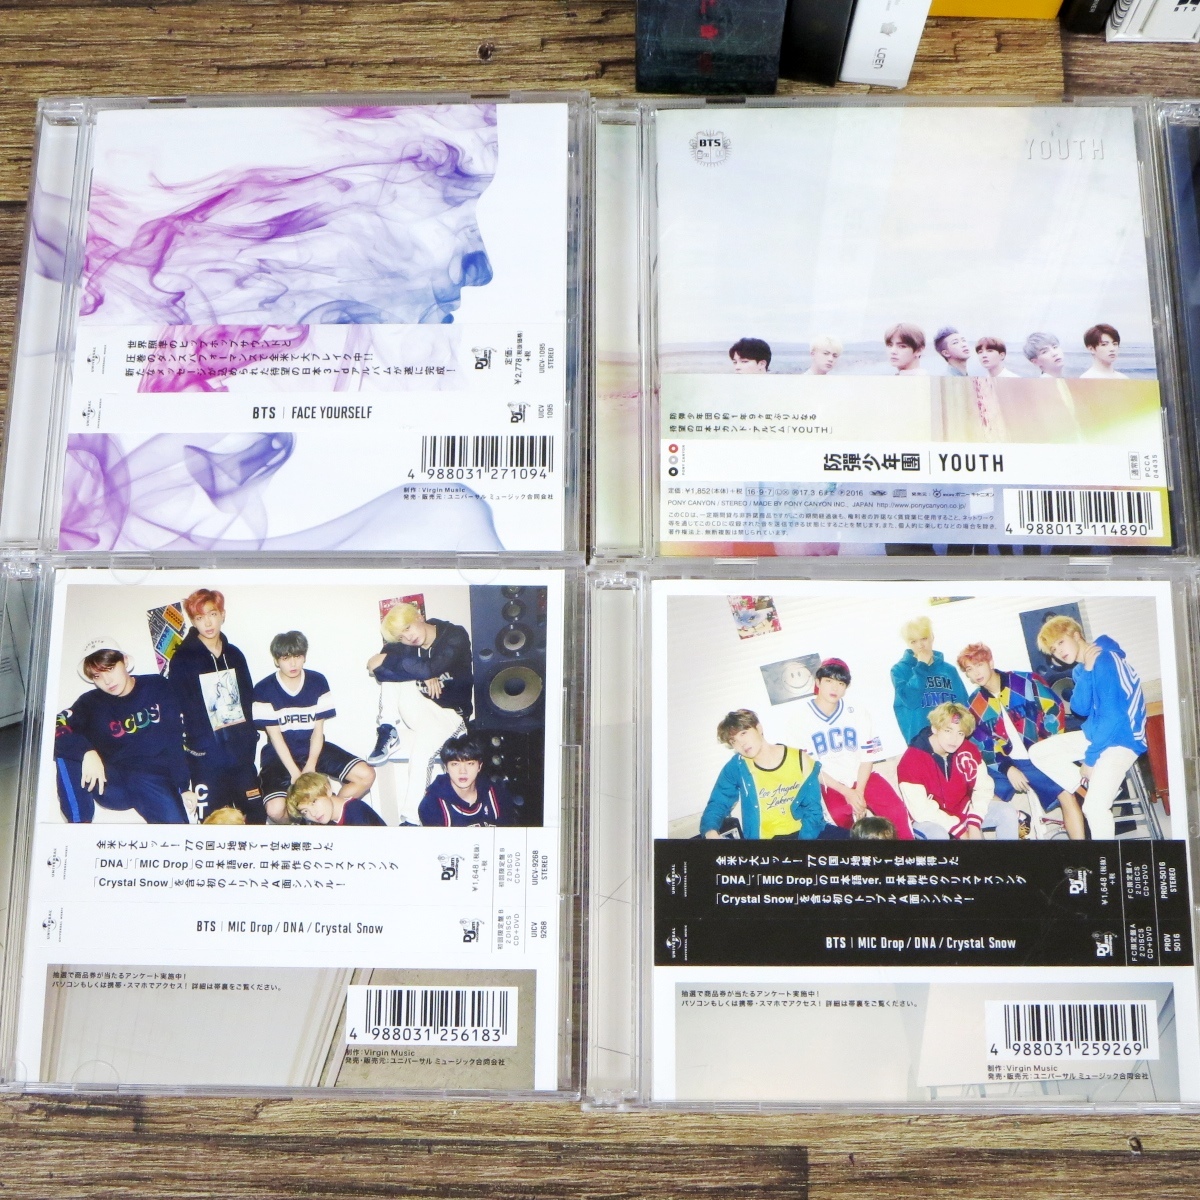 ◆BTS CD DVD/1集 DARK&WILD/2集 Wings/2 Cool 4 Skool/BUTTER/花様年華/BE/YOU NEVER WALK ALONE/Her/FACE YOURSELF/FAKE LOVE●z31279の画像6